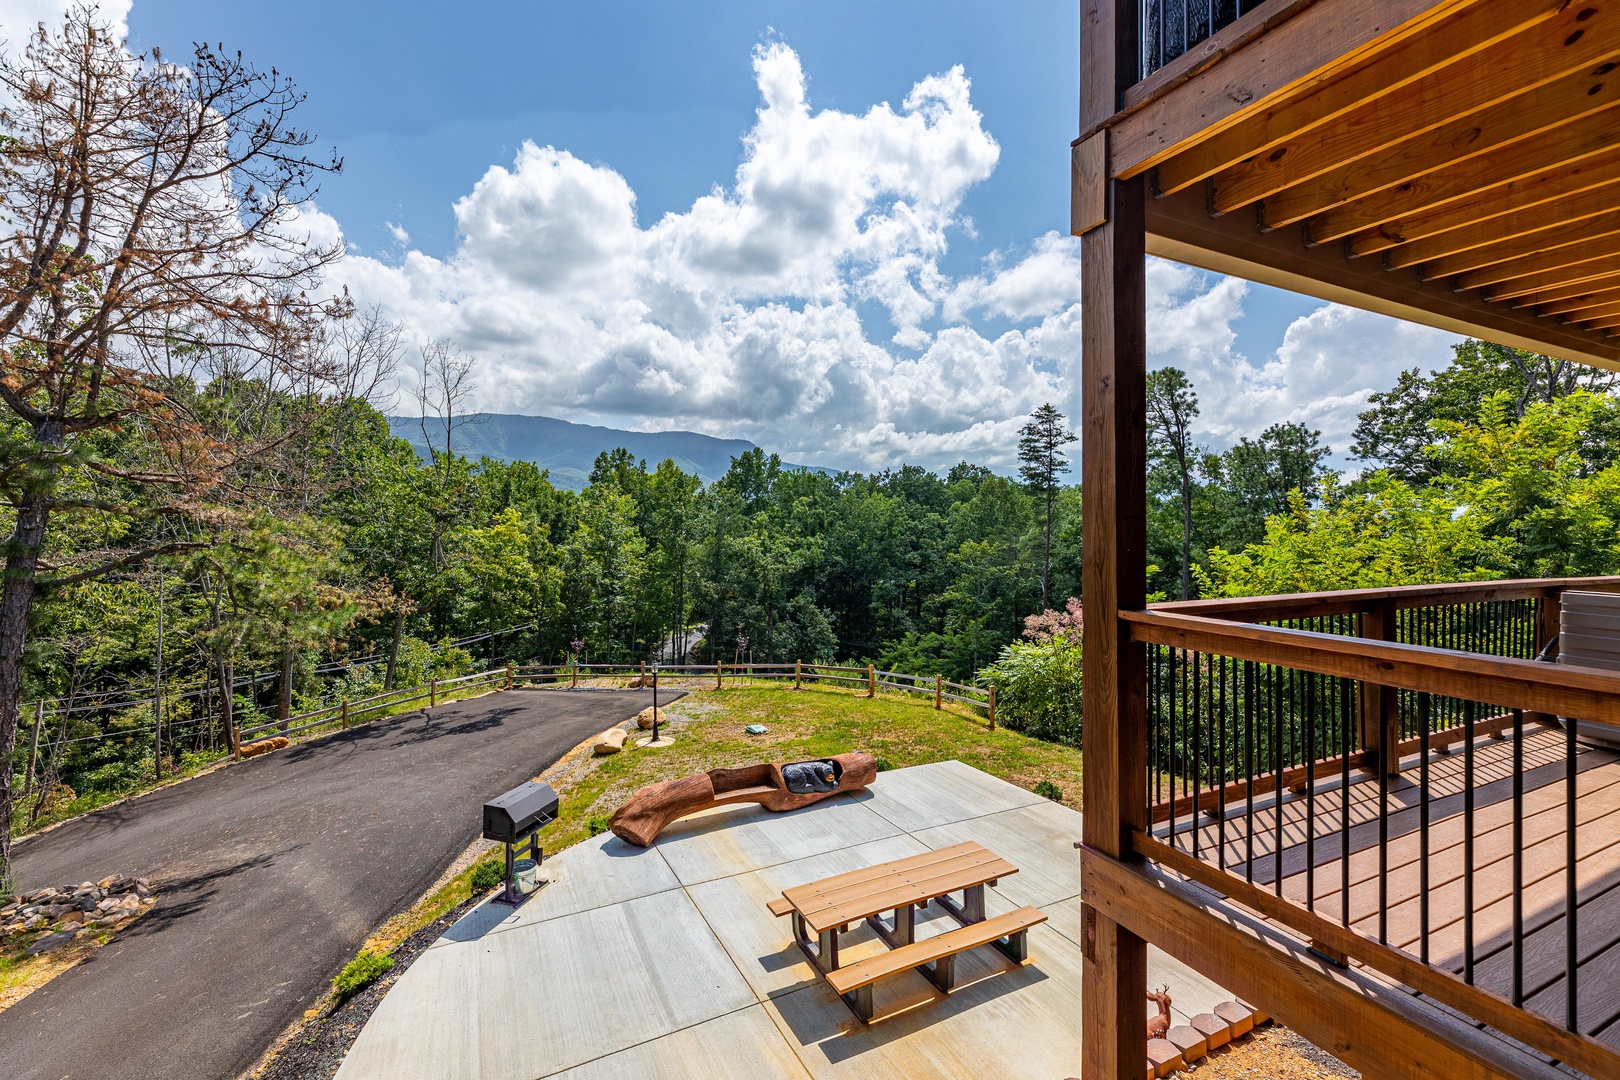 Grill and picnic area at Twin Peaks, a 5 bedroom cabin rental located in Gatlinburg